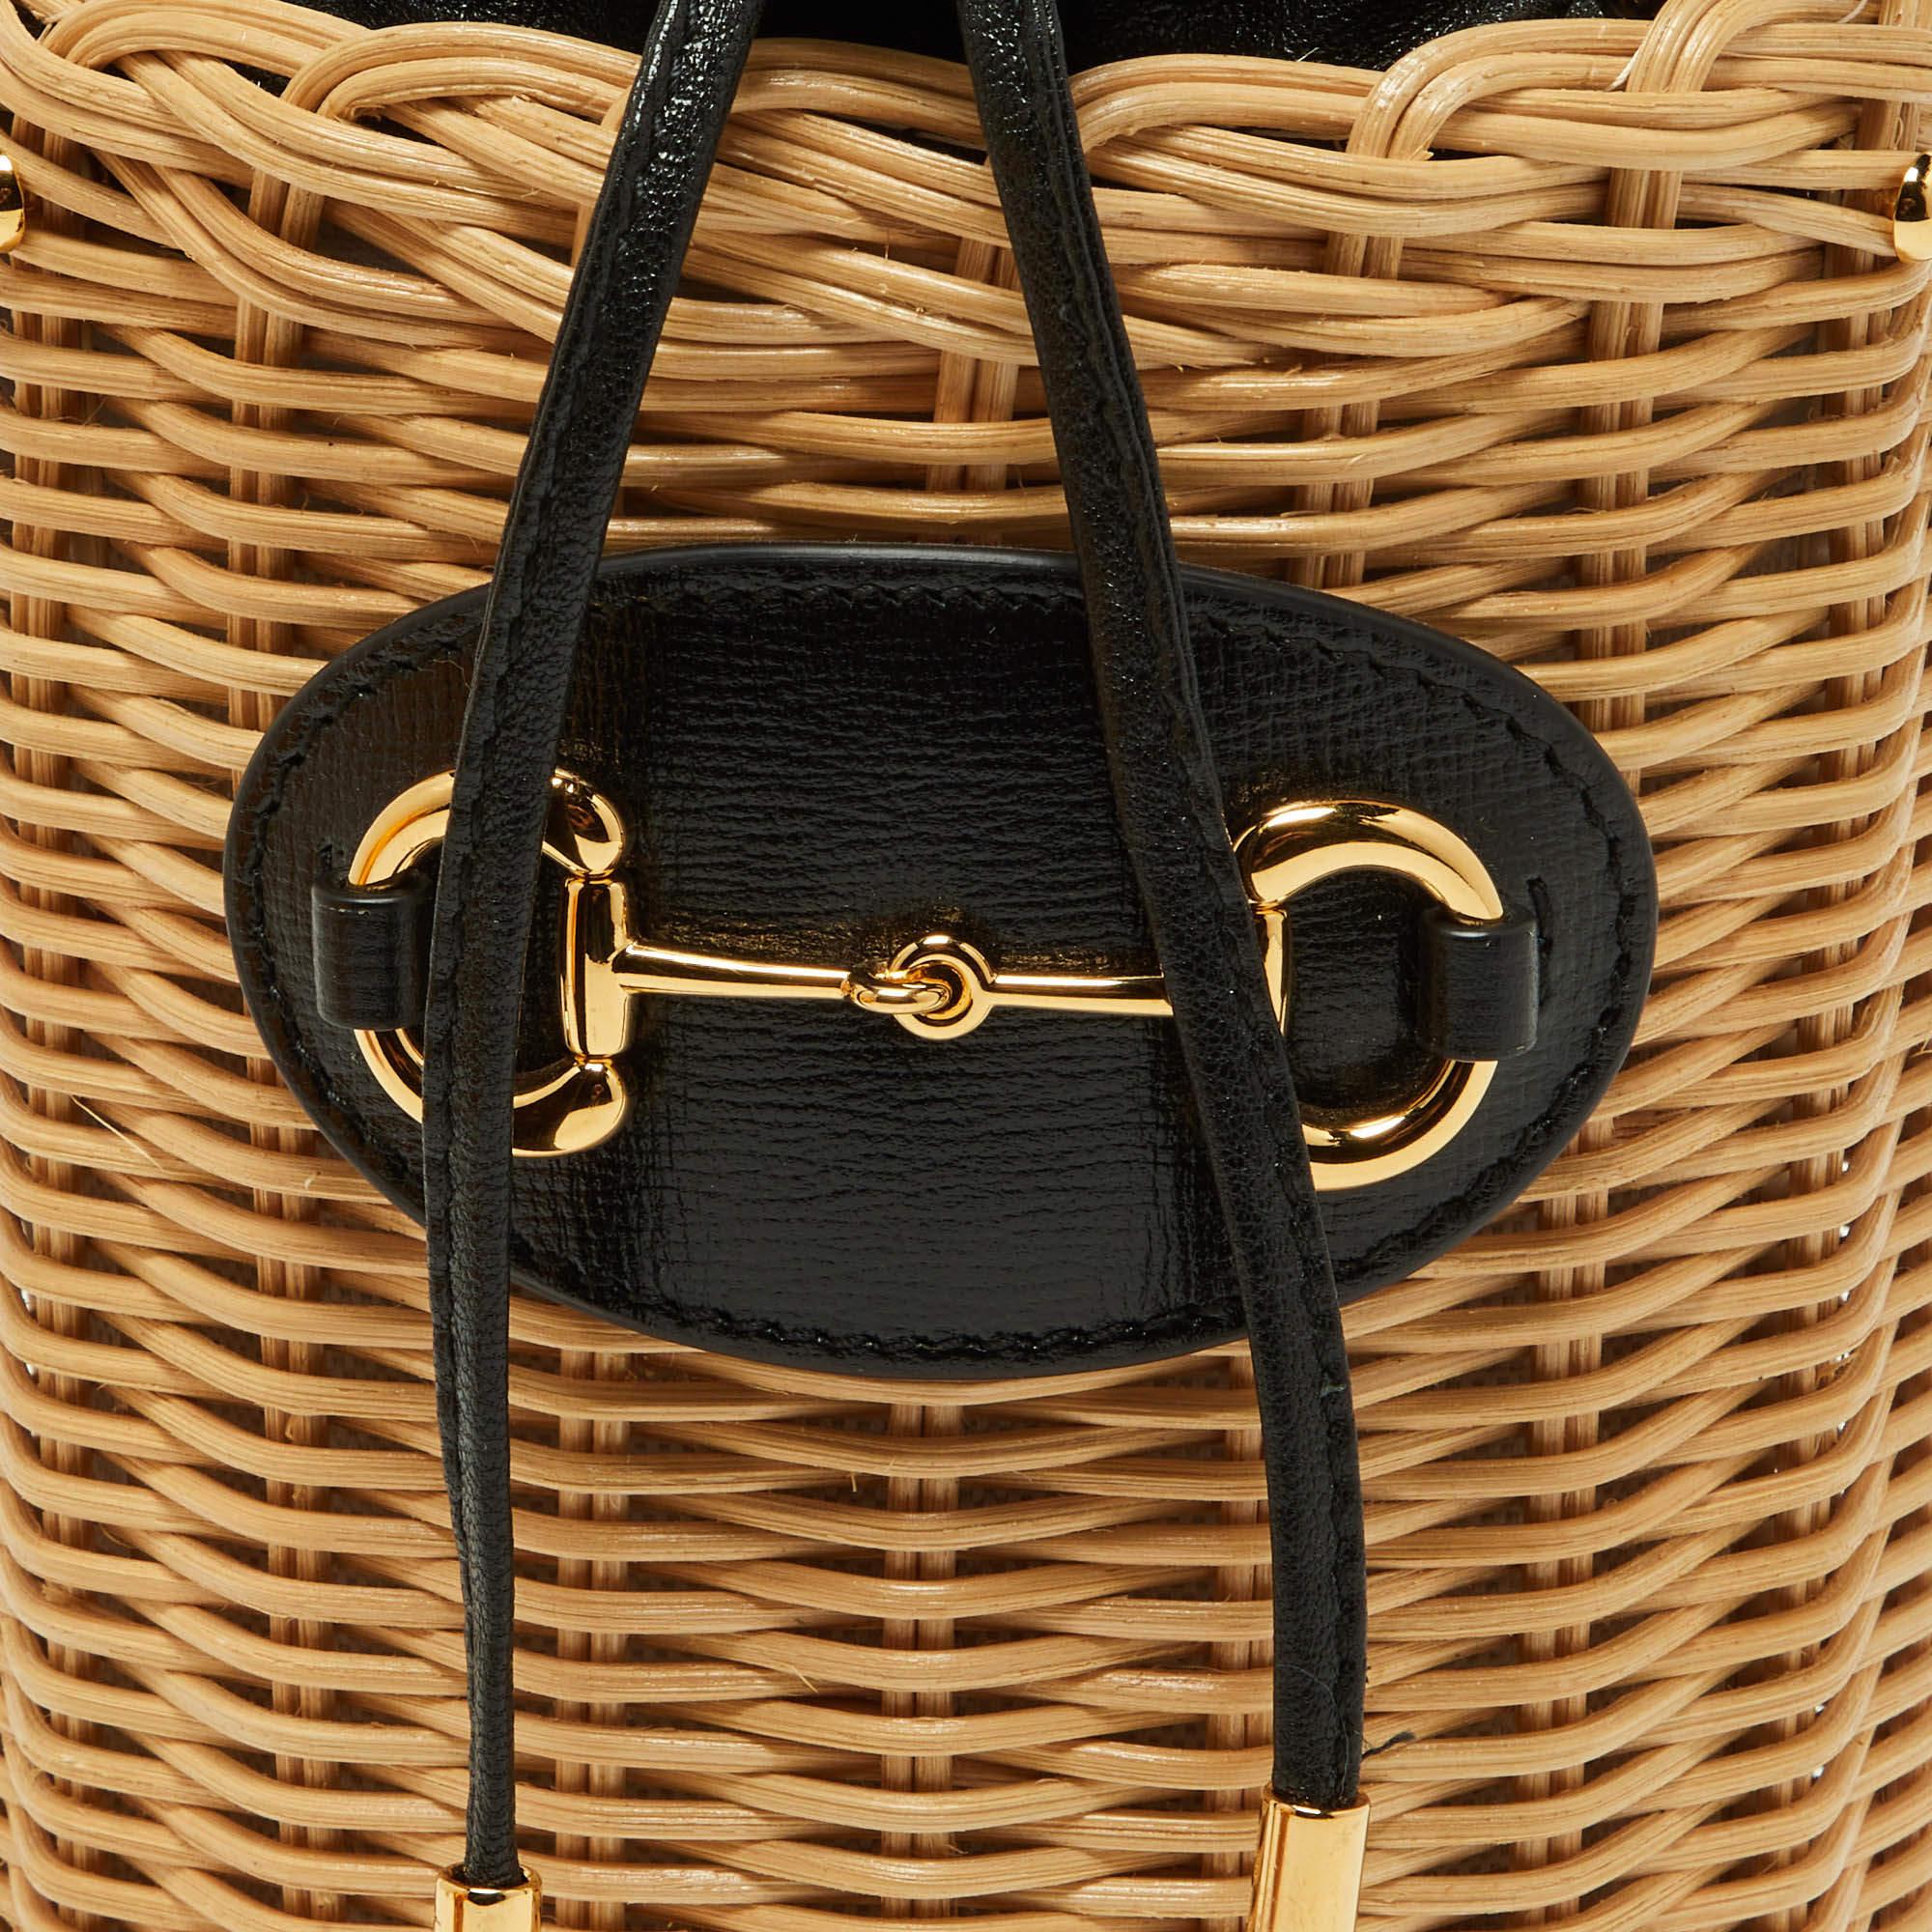 Gucci Beige/Black Wicker and Leather Horsebit 1955 Bucket Bag For Sale 3